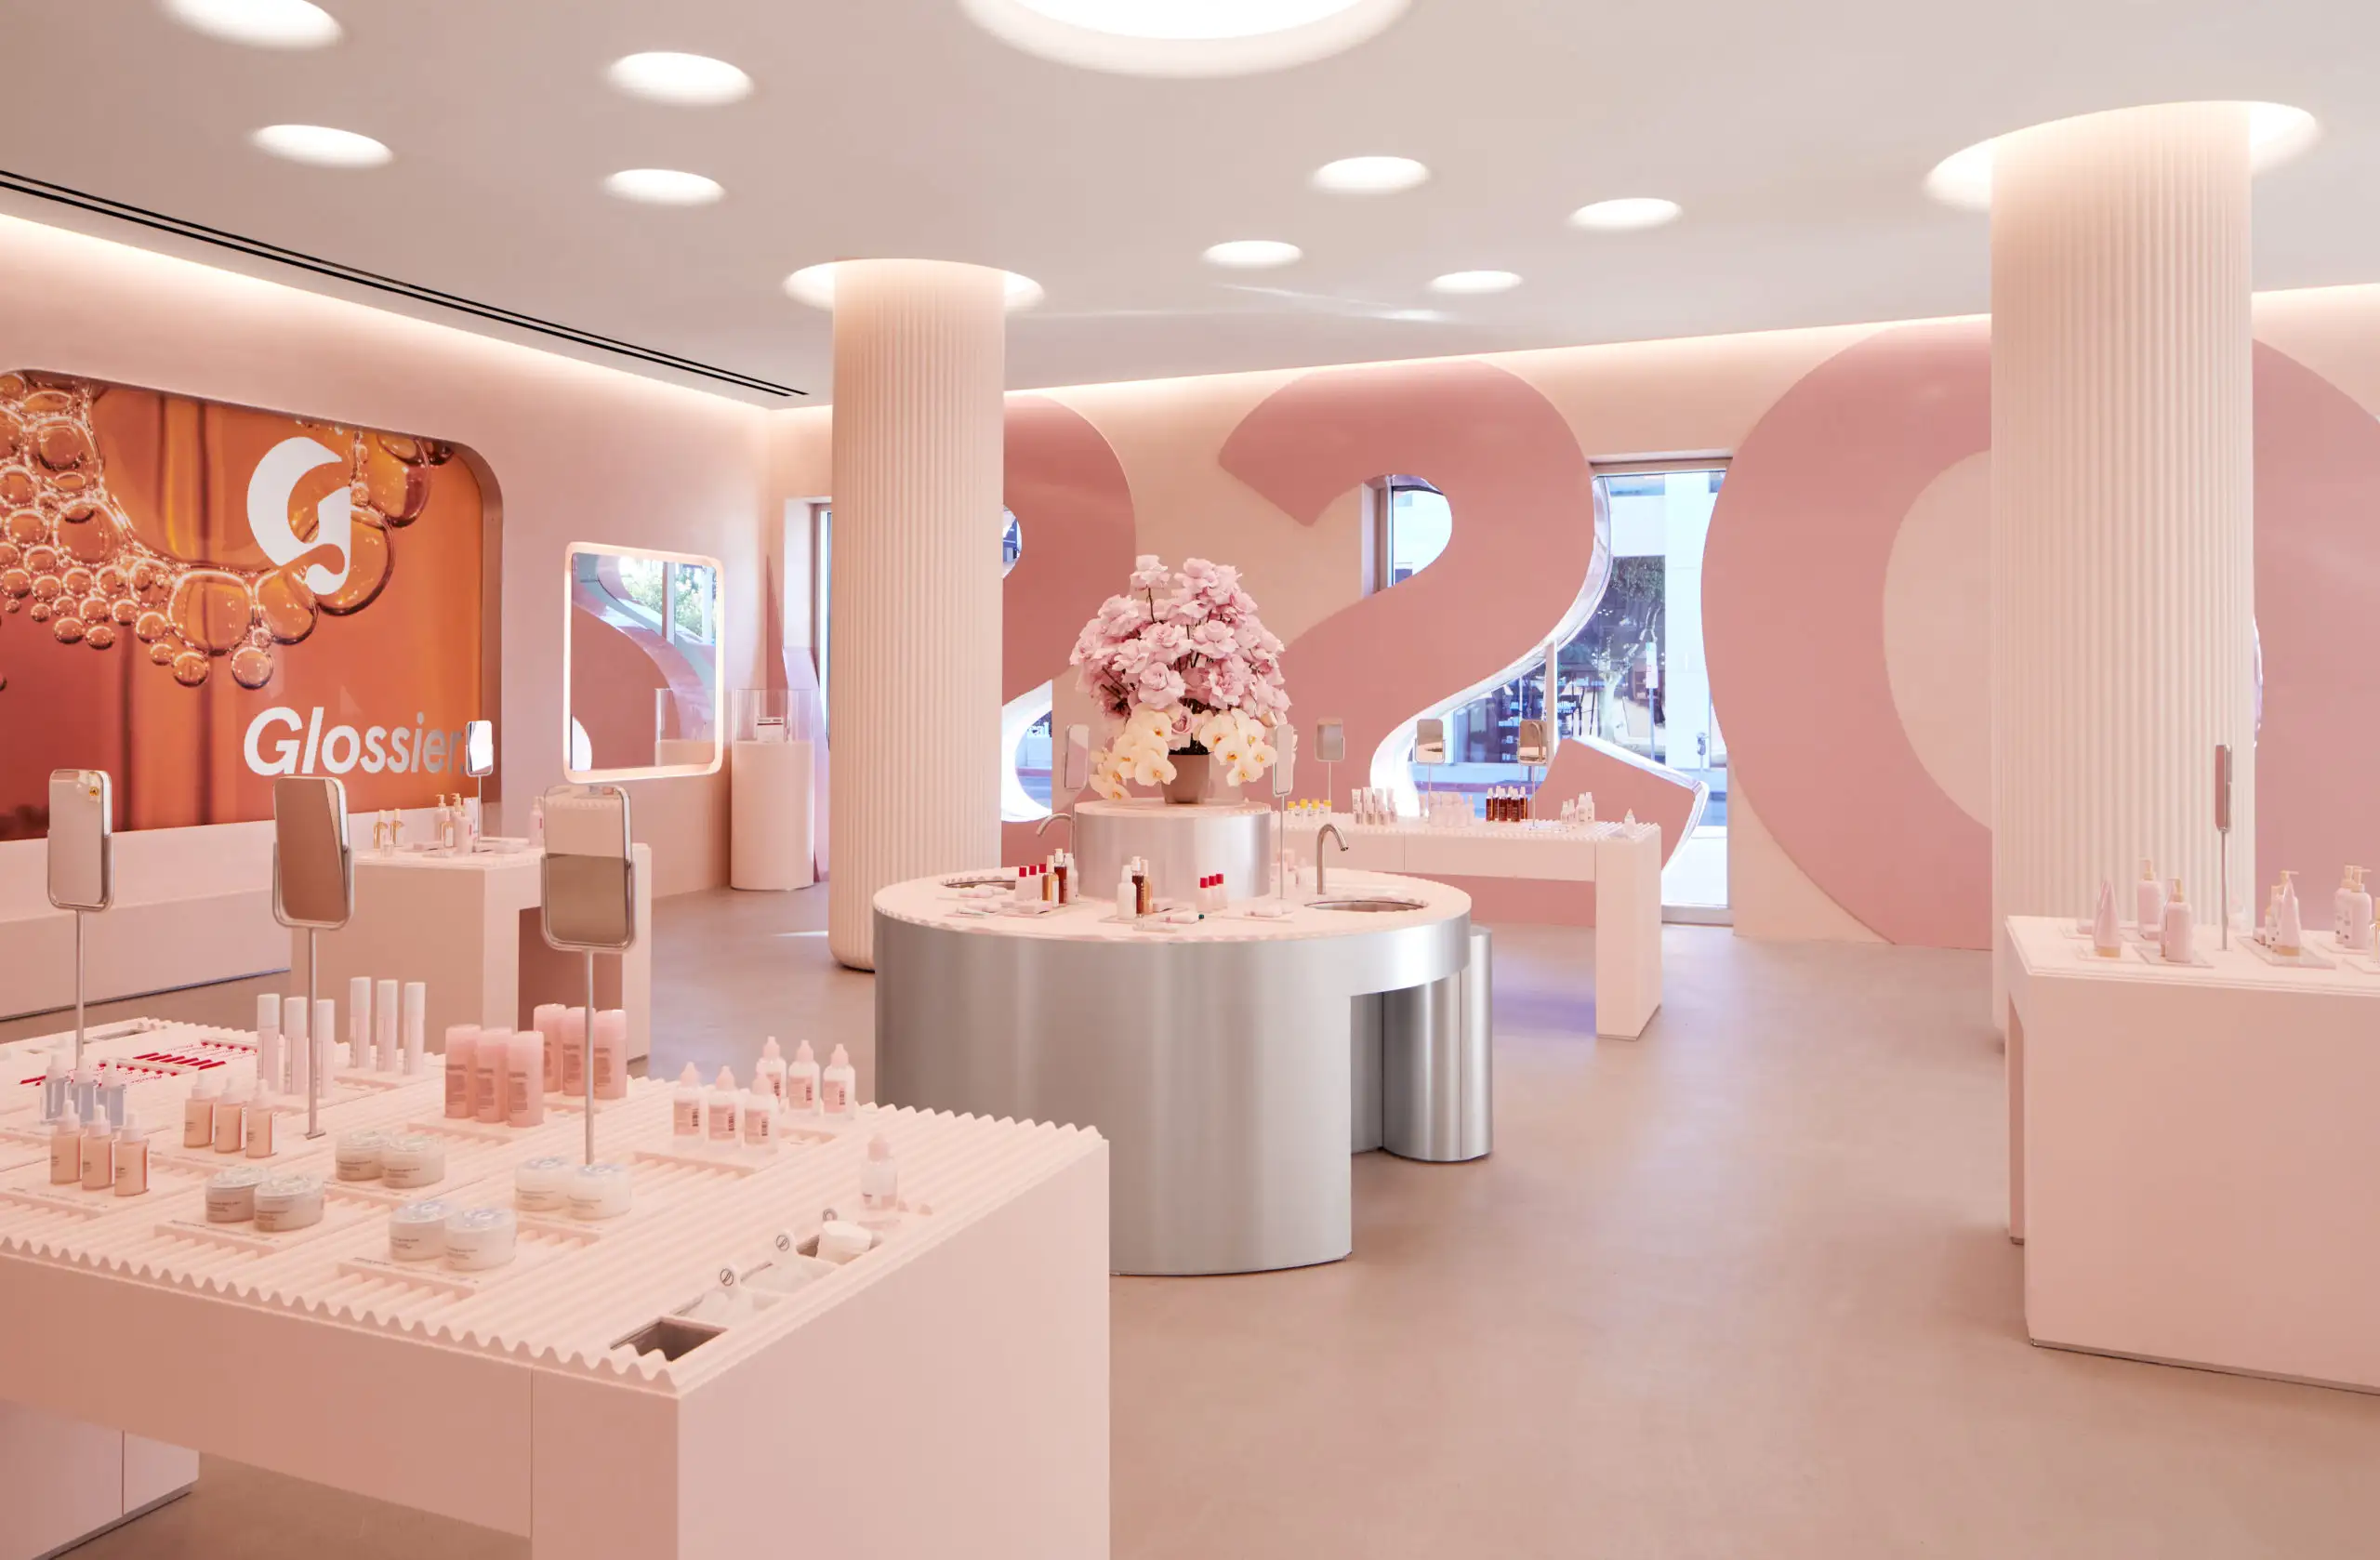 Why D2C brand Glossier is returning to in-person retail